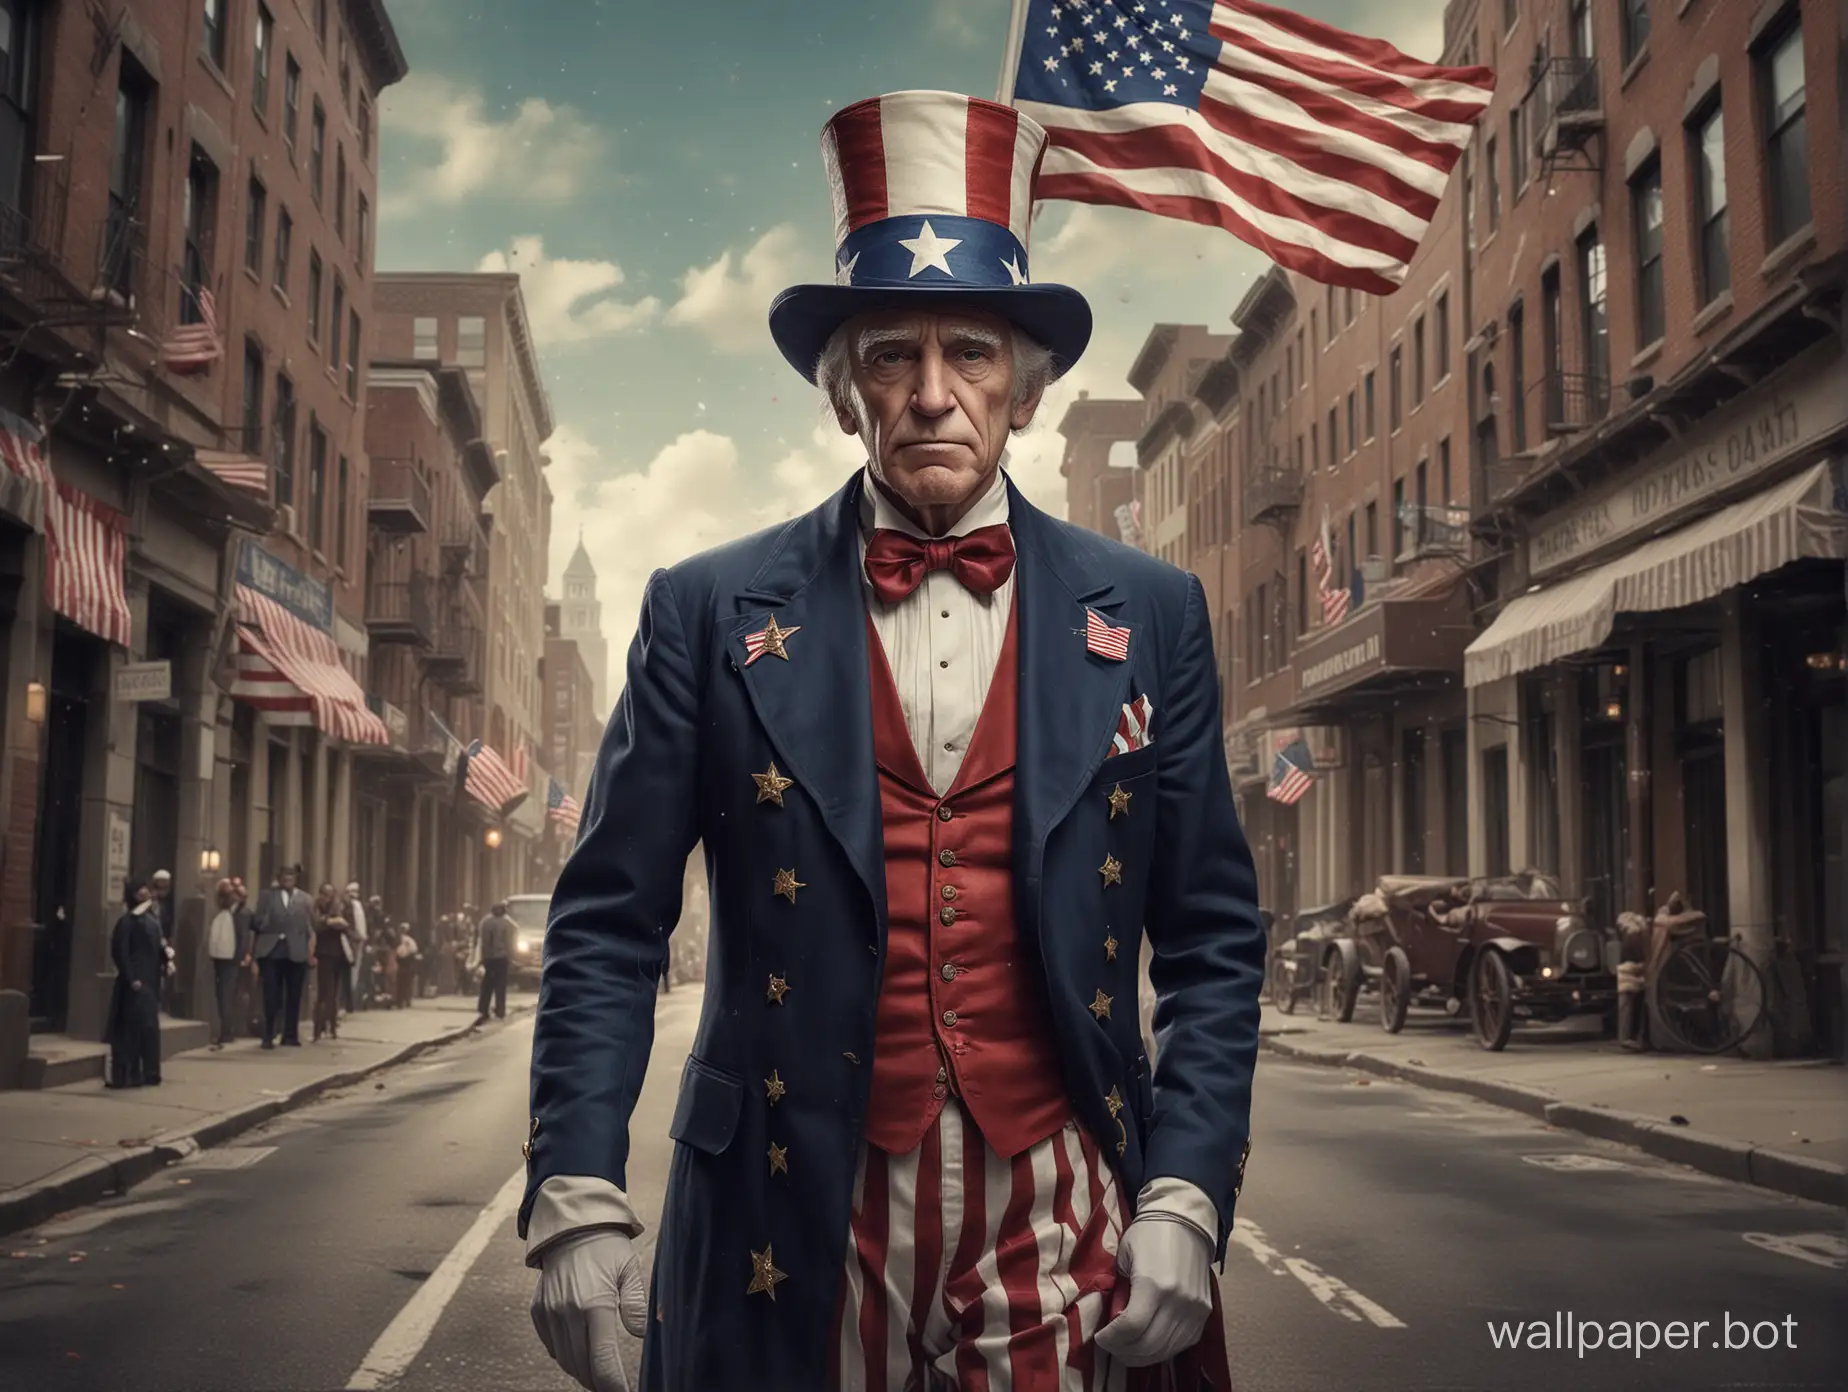 A captivating, cinematic image of Uncle Sam, the personification of the United States. Dressed in his traditional suit, adorned with stars and stripes, The background is a bustling city street, with a blend of old and modern architecture. The overall tone of the image is a mix of intrigue and satire, offering a clever social commentary on the effects of inflation., cinematic, photo